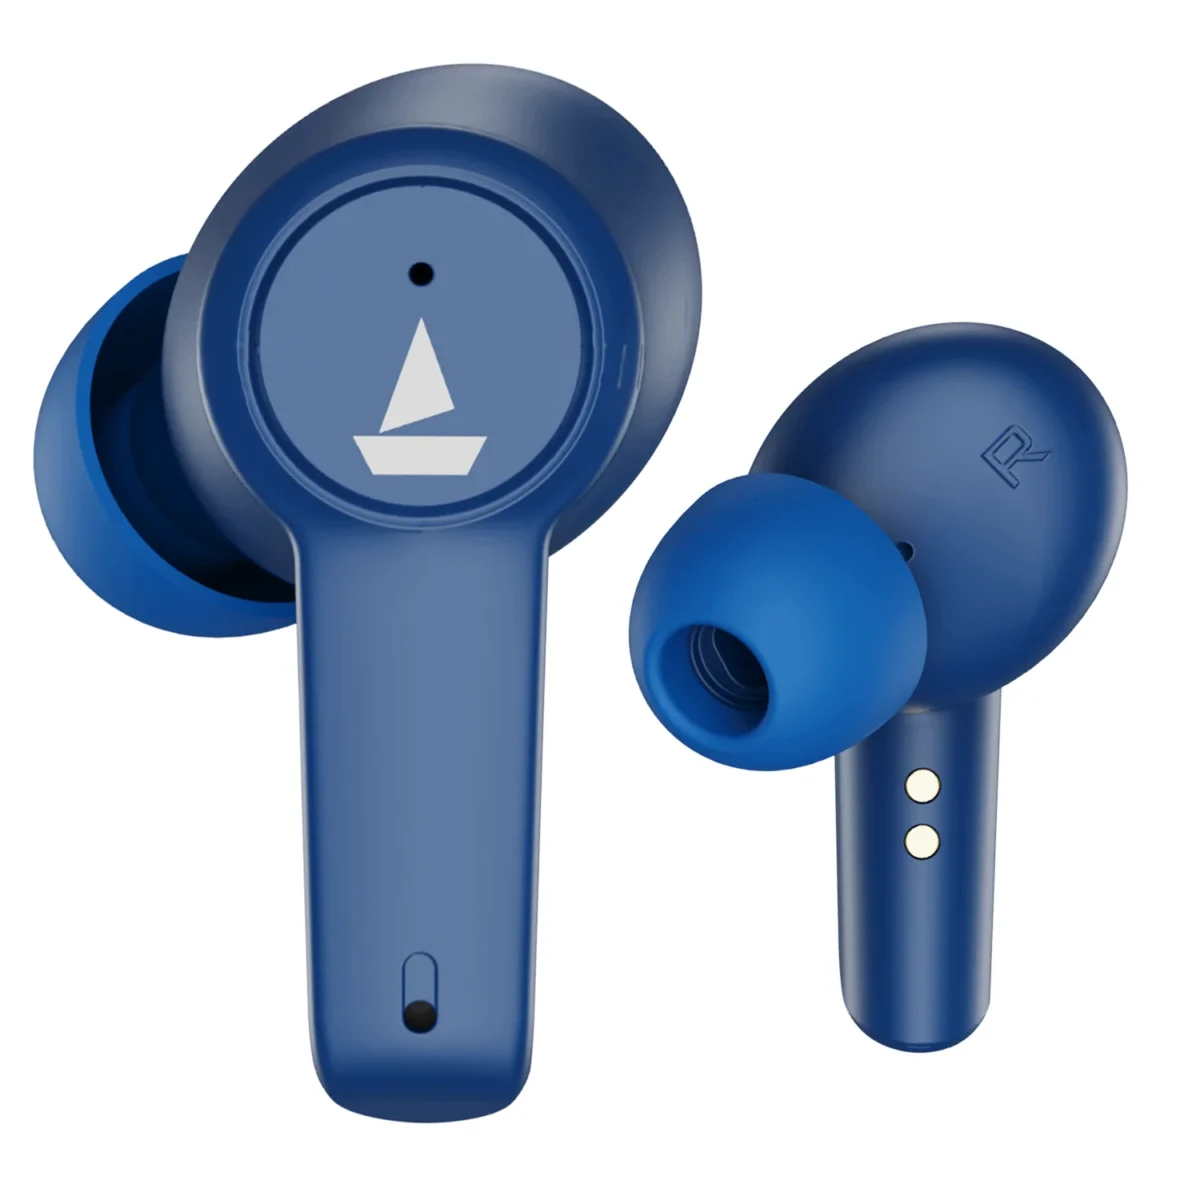 Boat airdopes 411 anc earbuds (blue)